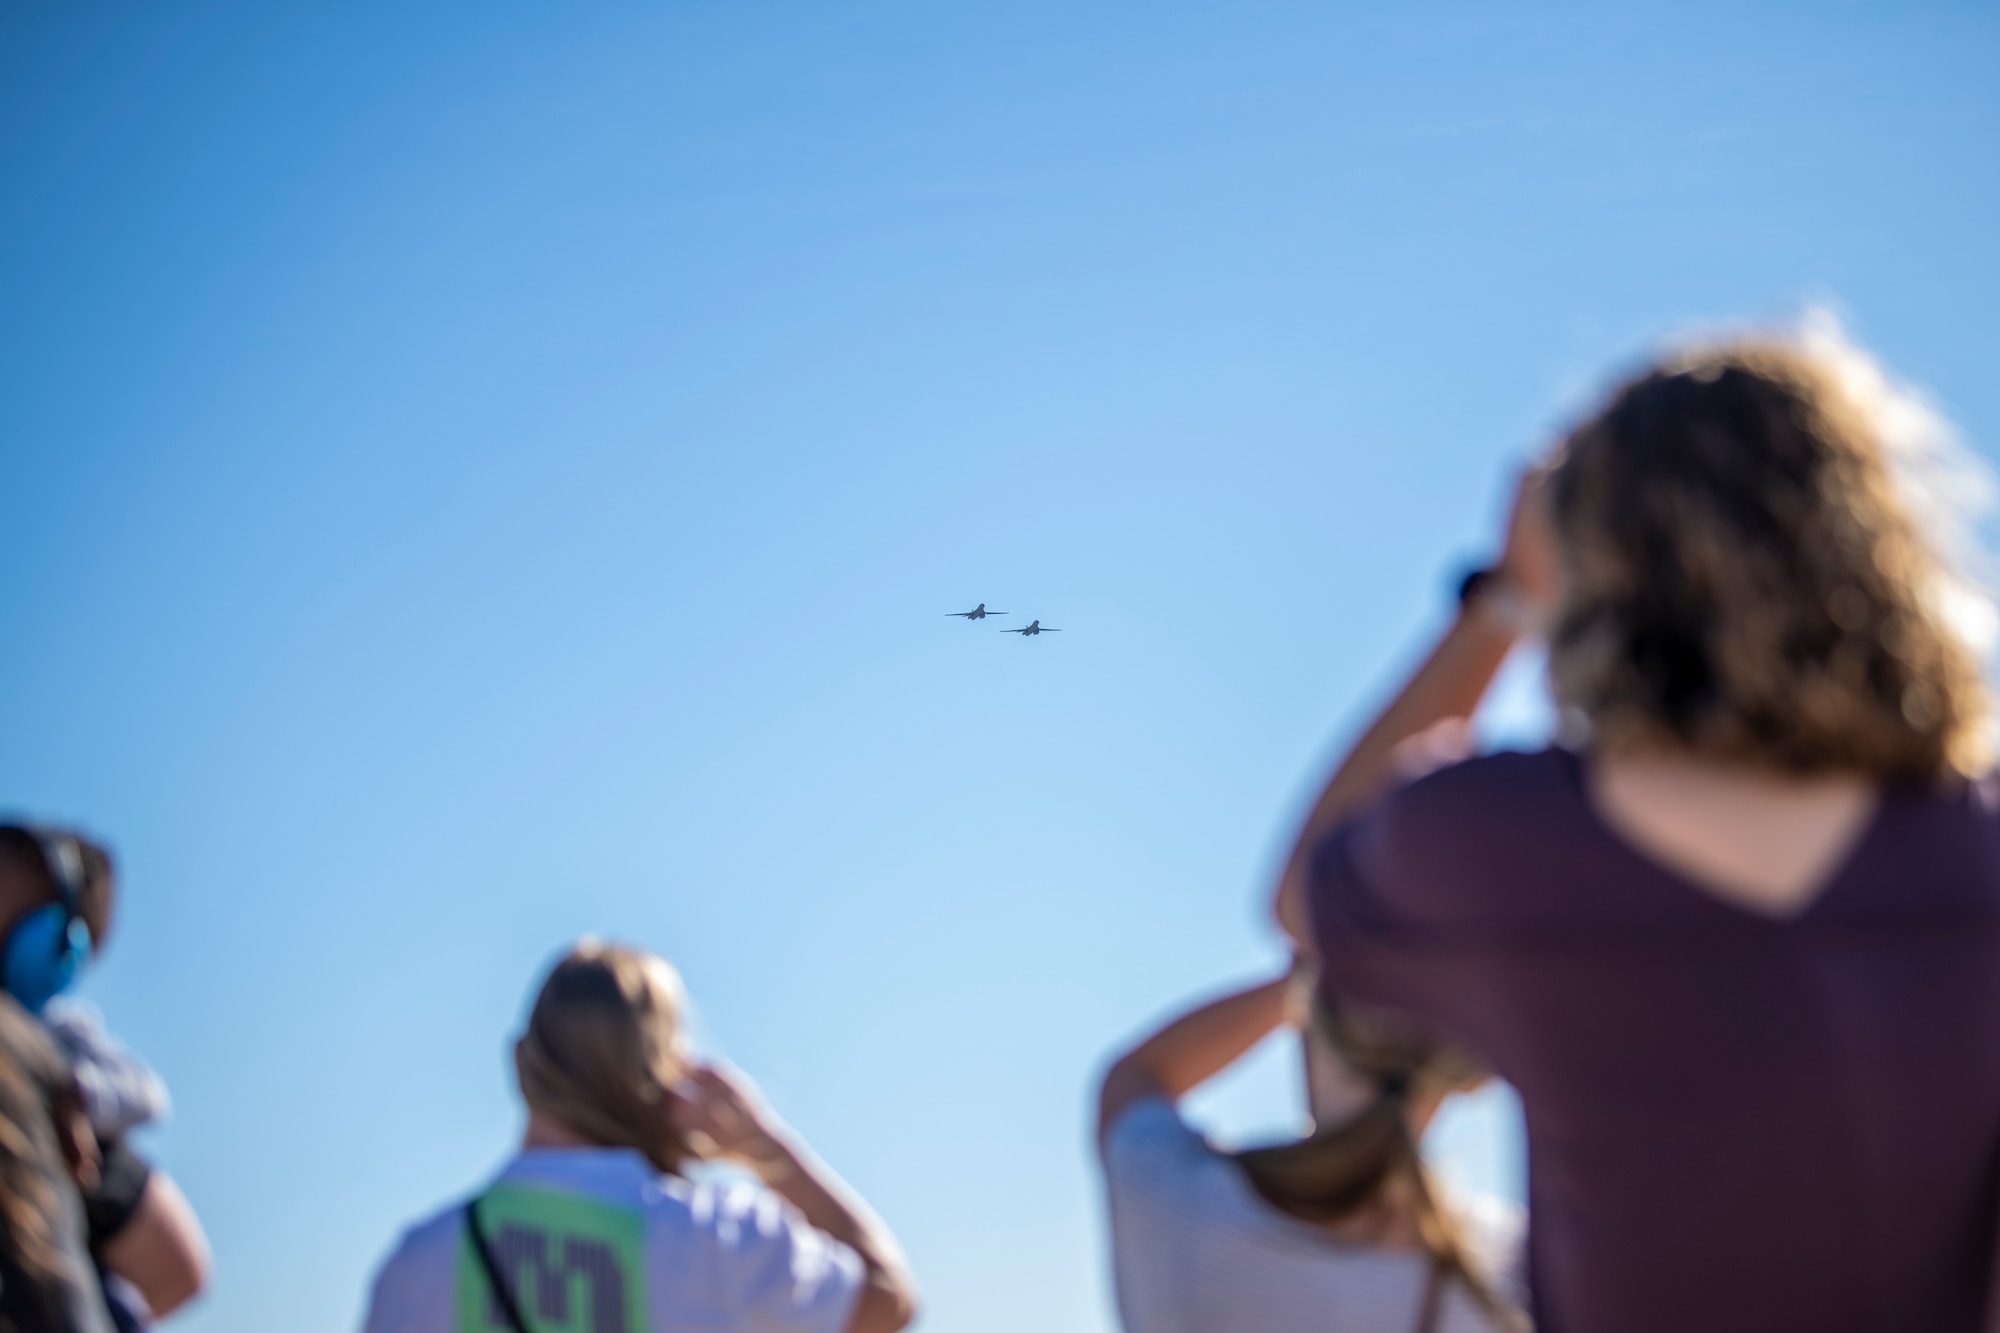 Families from the 9th Bomb Squadron watch two B-1B Lancers fly overhead at Dyess Air Force Base, Texas, Nov. 14, 2021.